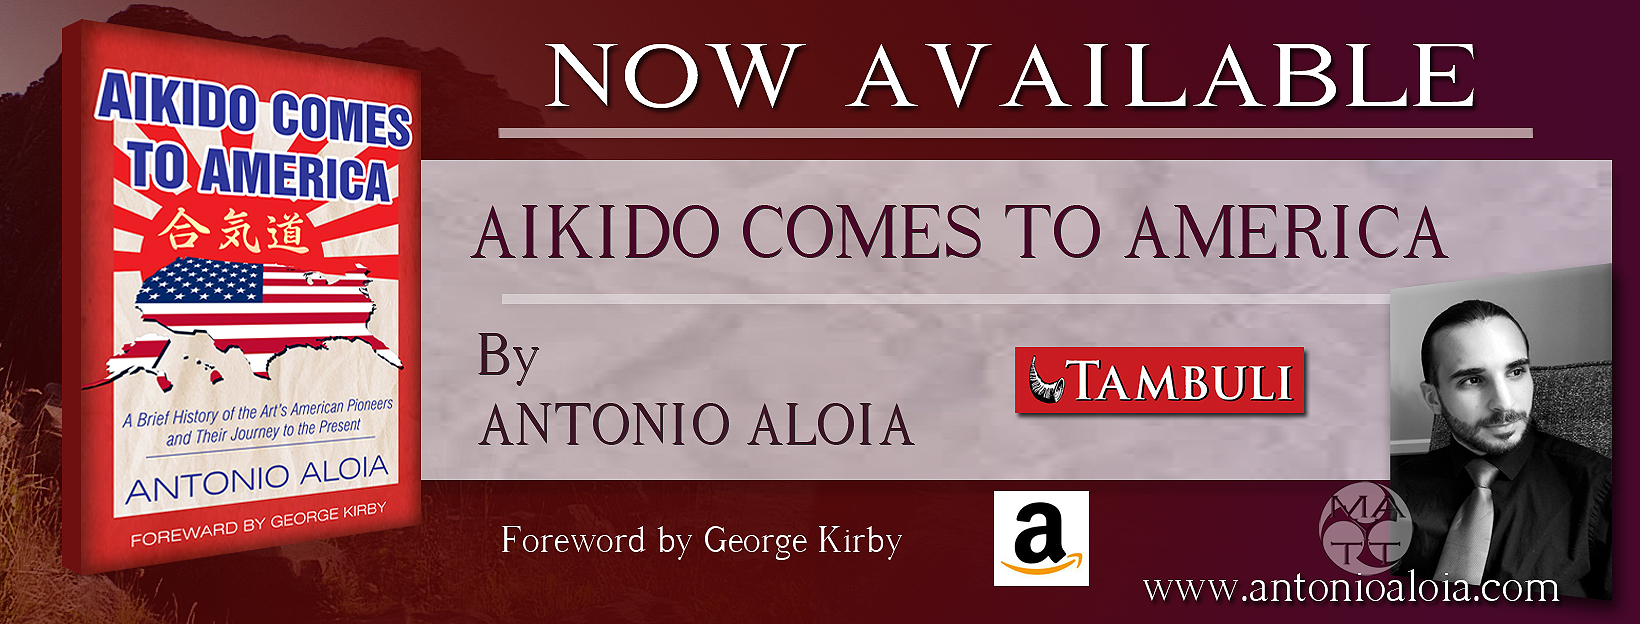 Aikido comes to America Now Available Sept 25